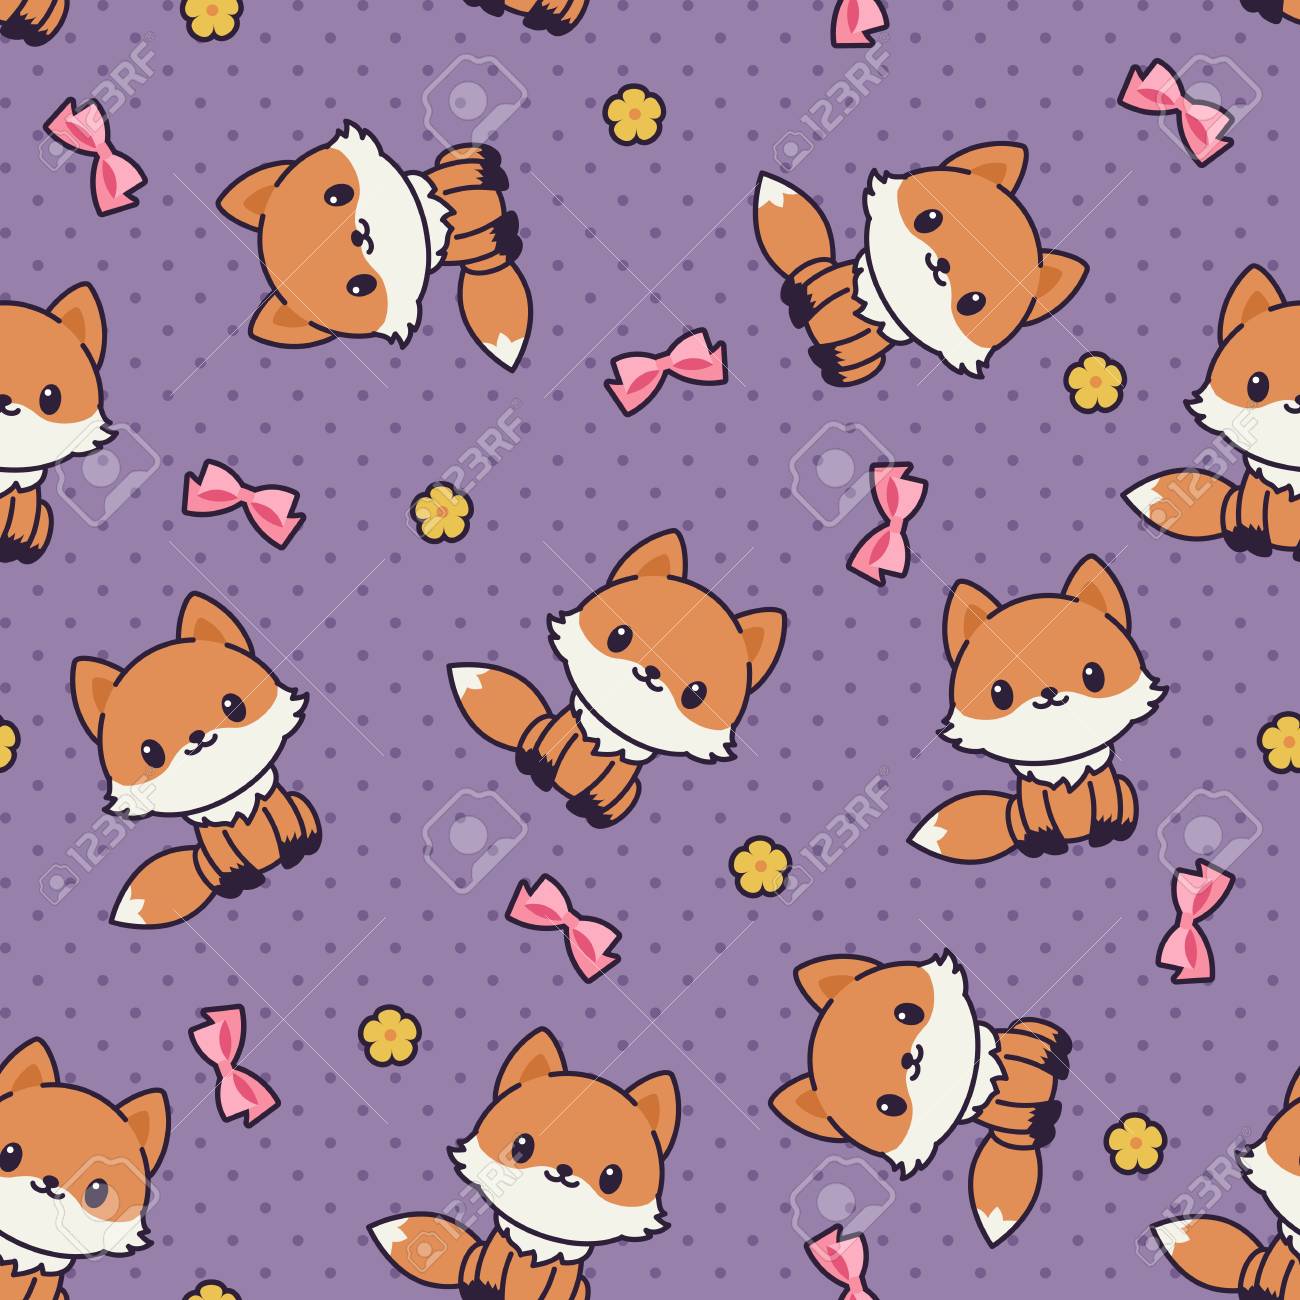 Cute Foxes Seamless Vector Pattern Wallpaper Royalty Free